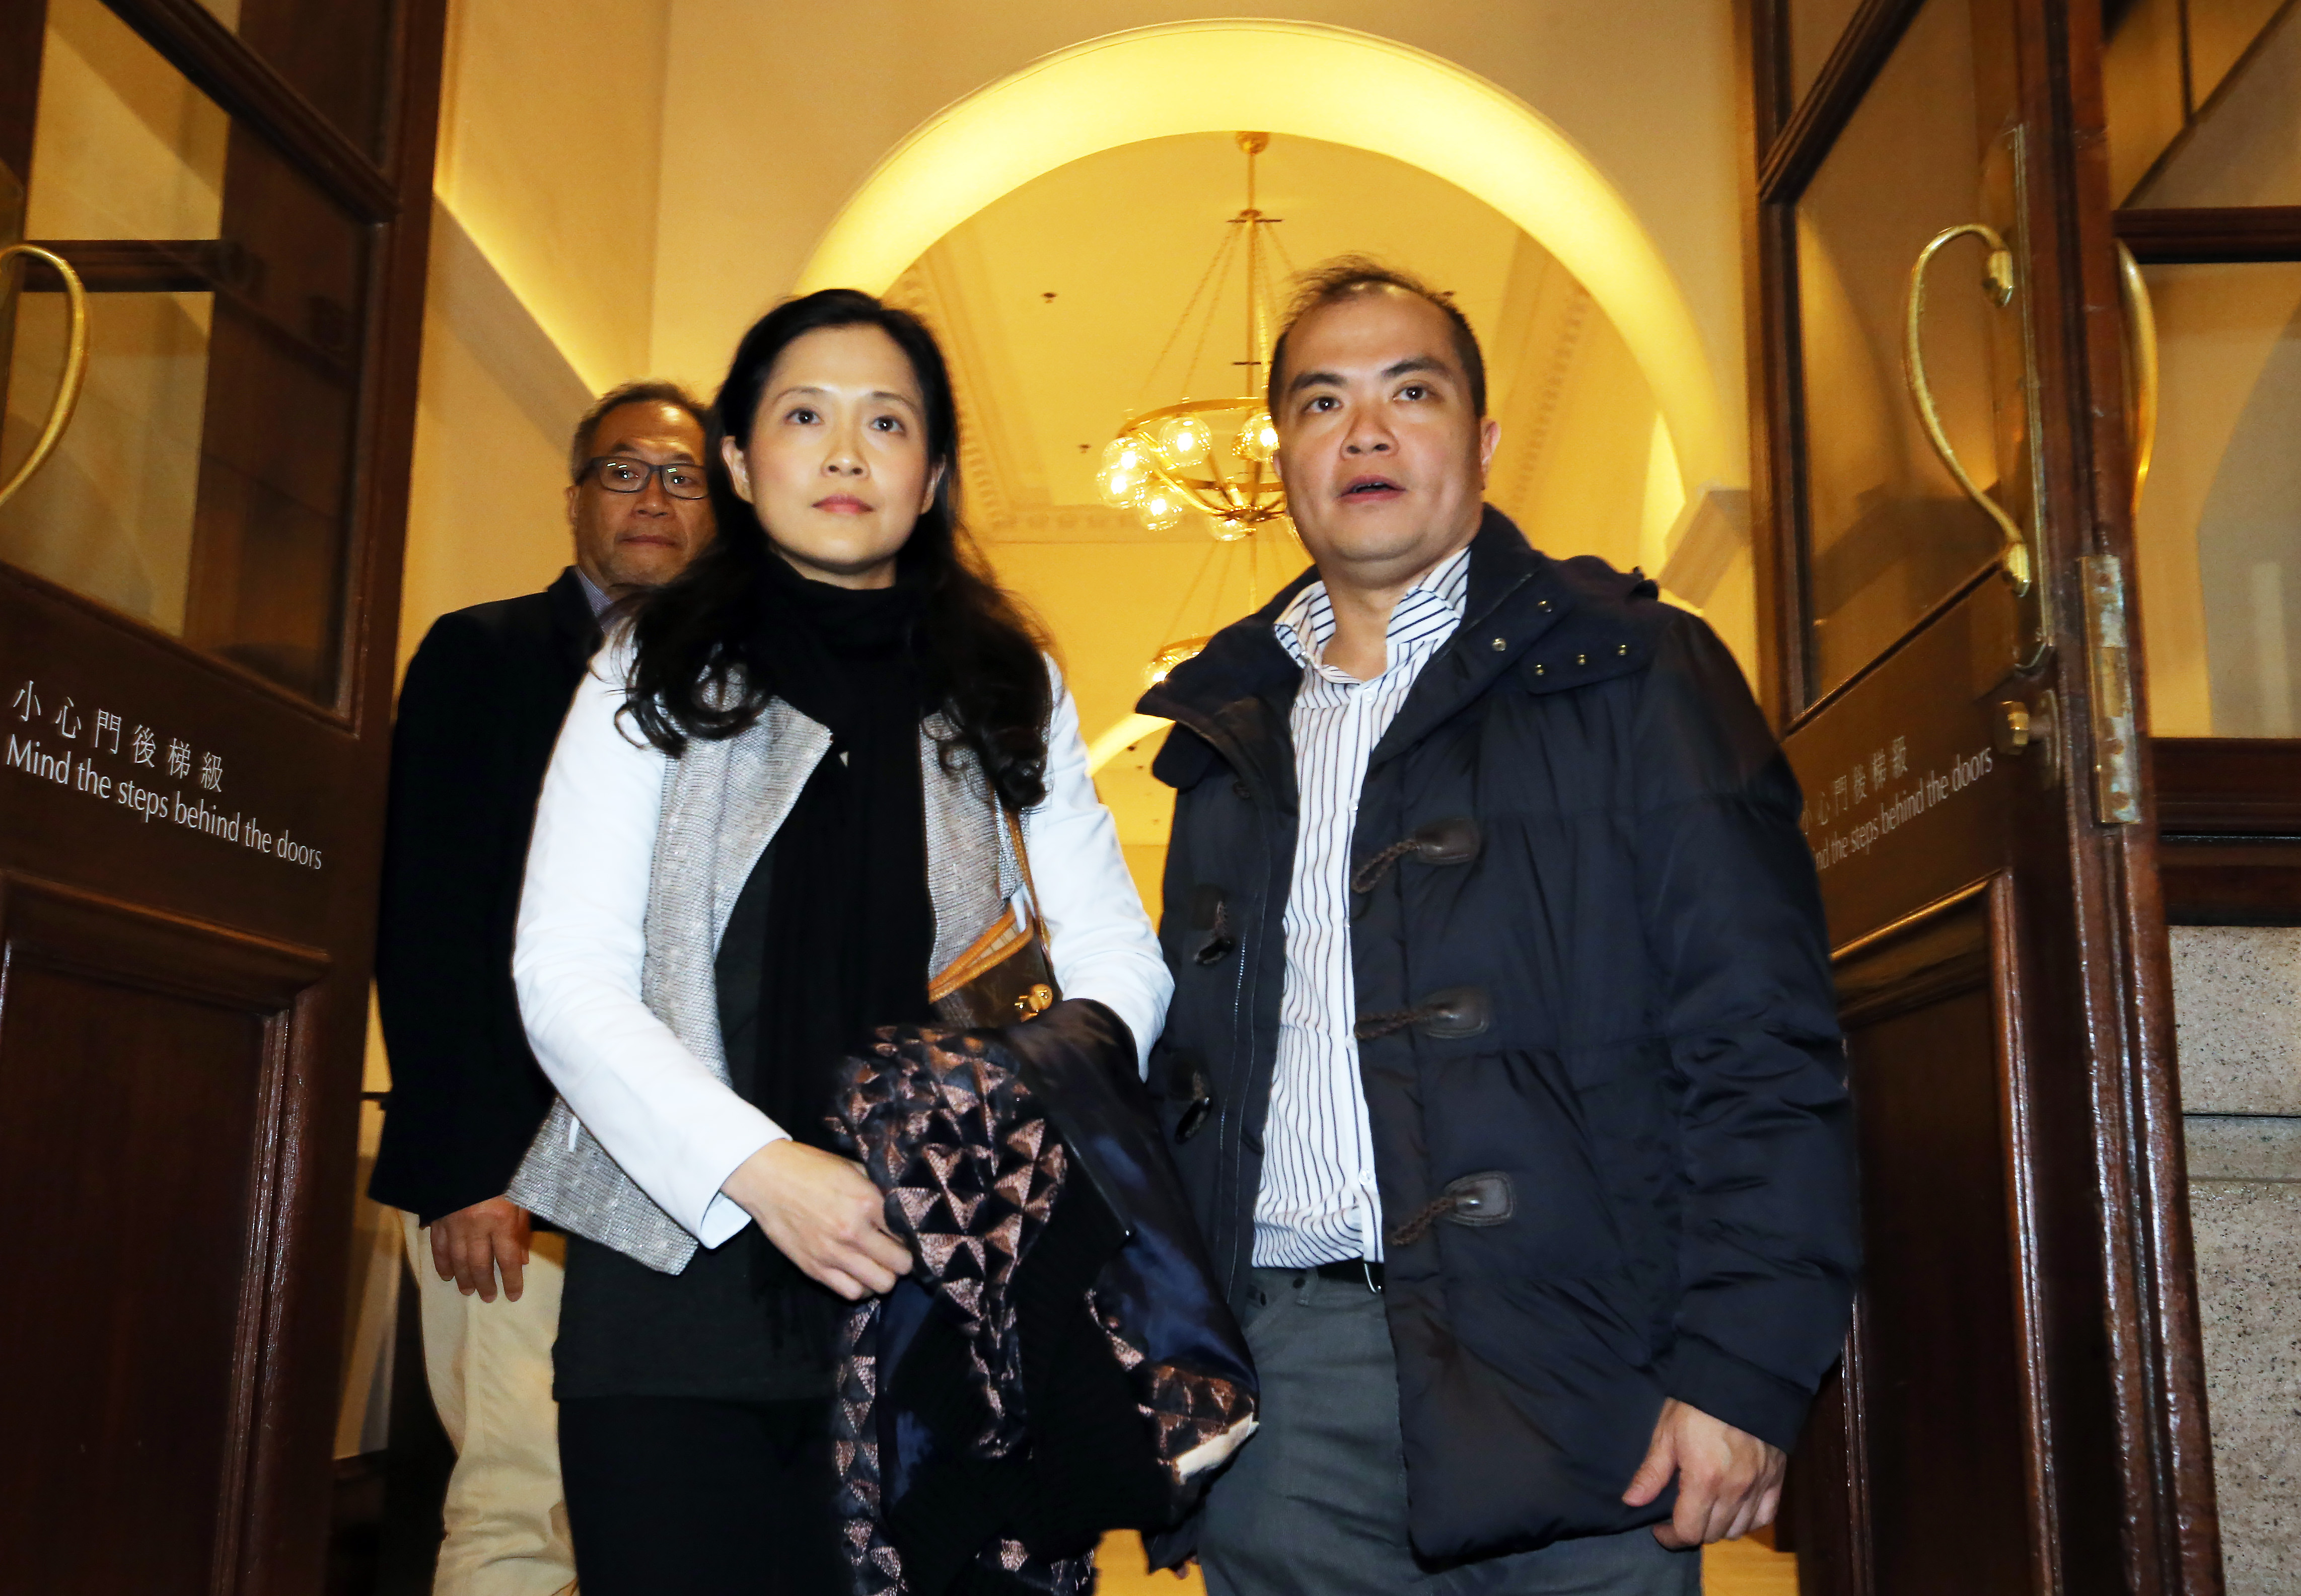 Yvonne Kam Kiu-yan(L), Financial Controller of Yung Kee, and her brother Carrel Kam Lin-wang appear at Court of Final Appeal in Central. 16DEC15 SCMP/ Felix Wong